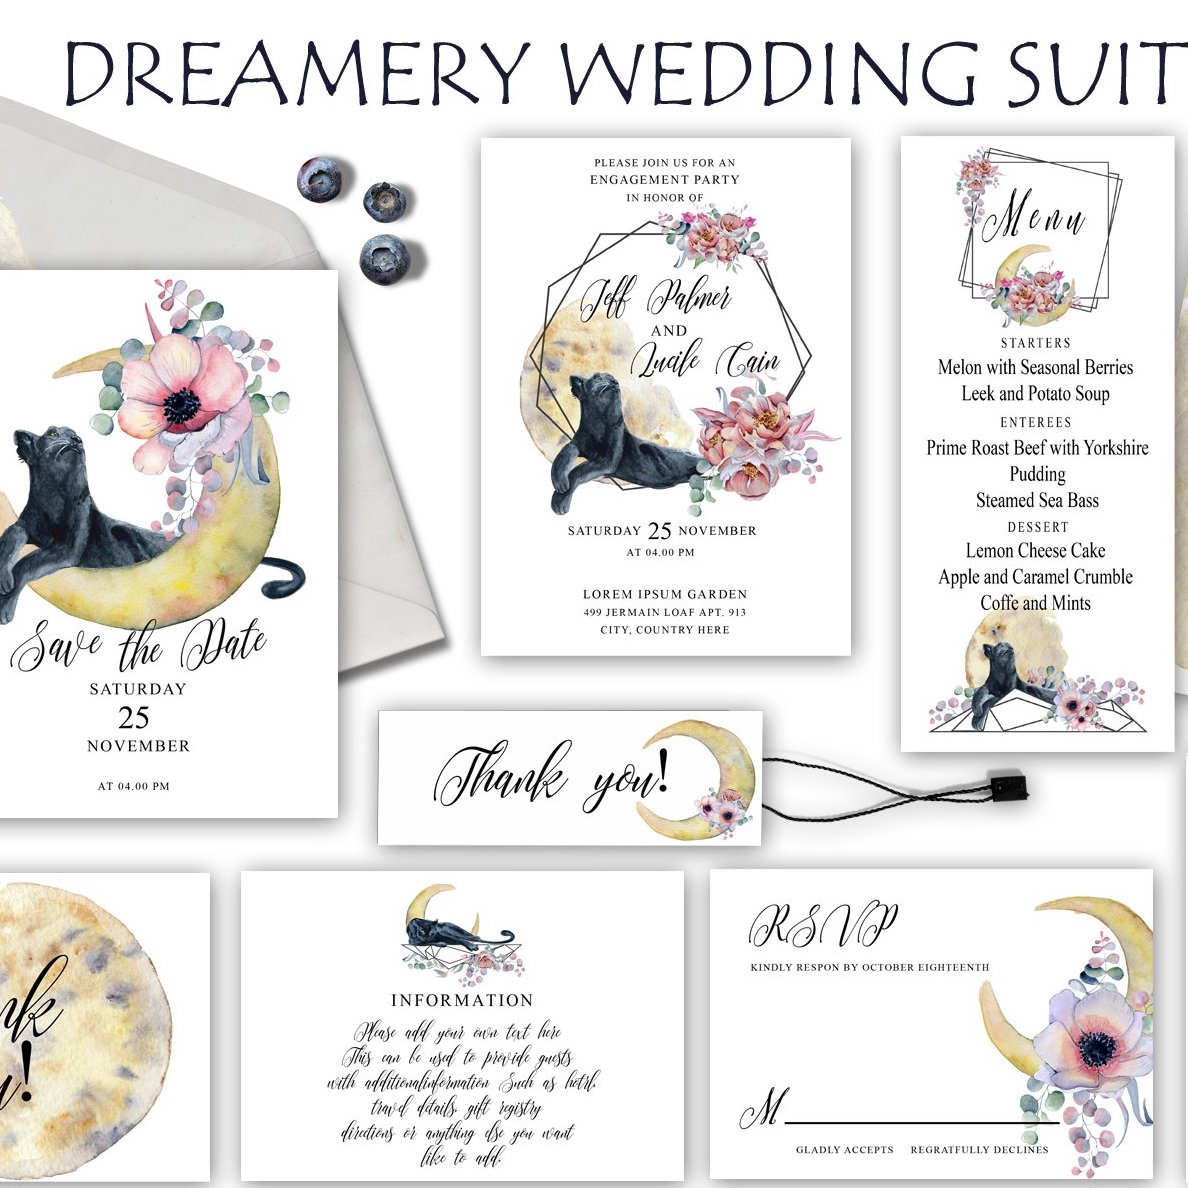 Dreamery Wedding Suit preview image.